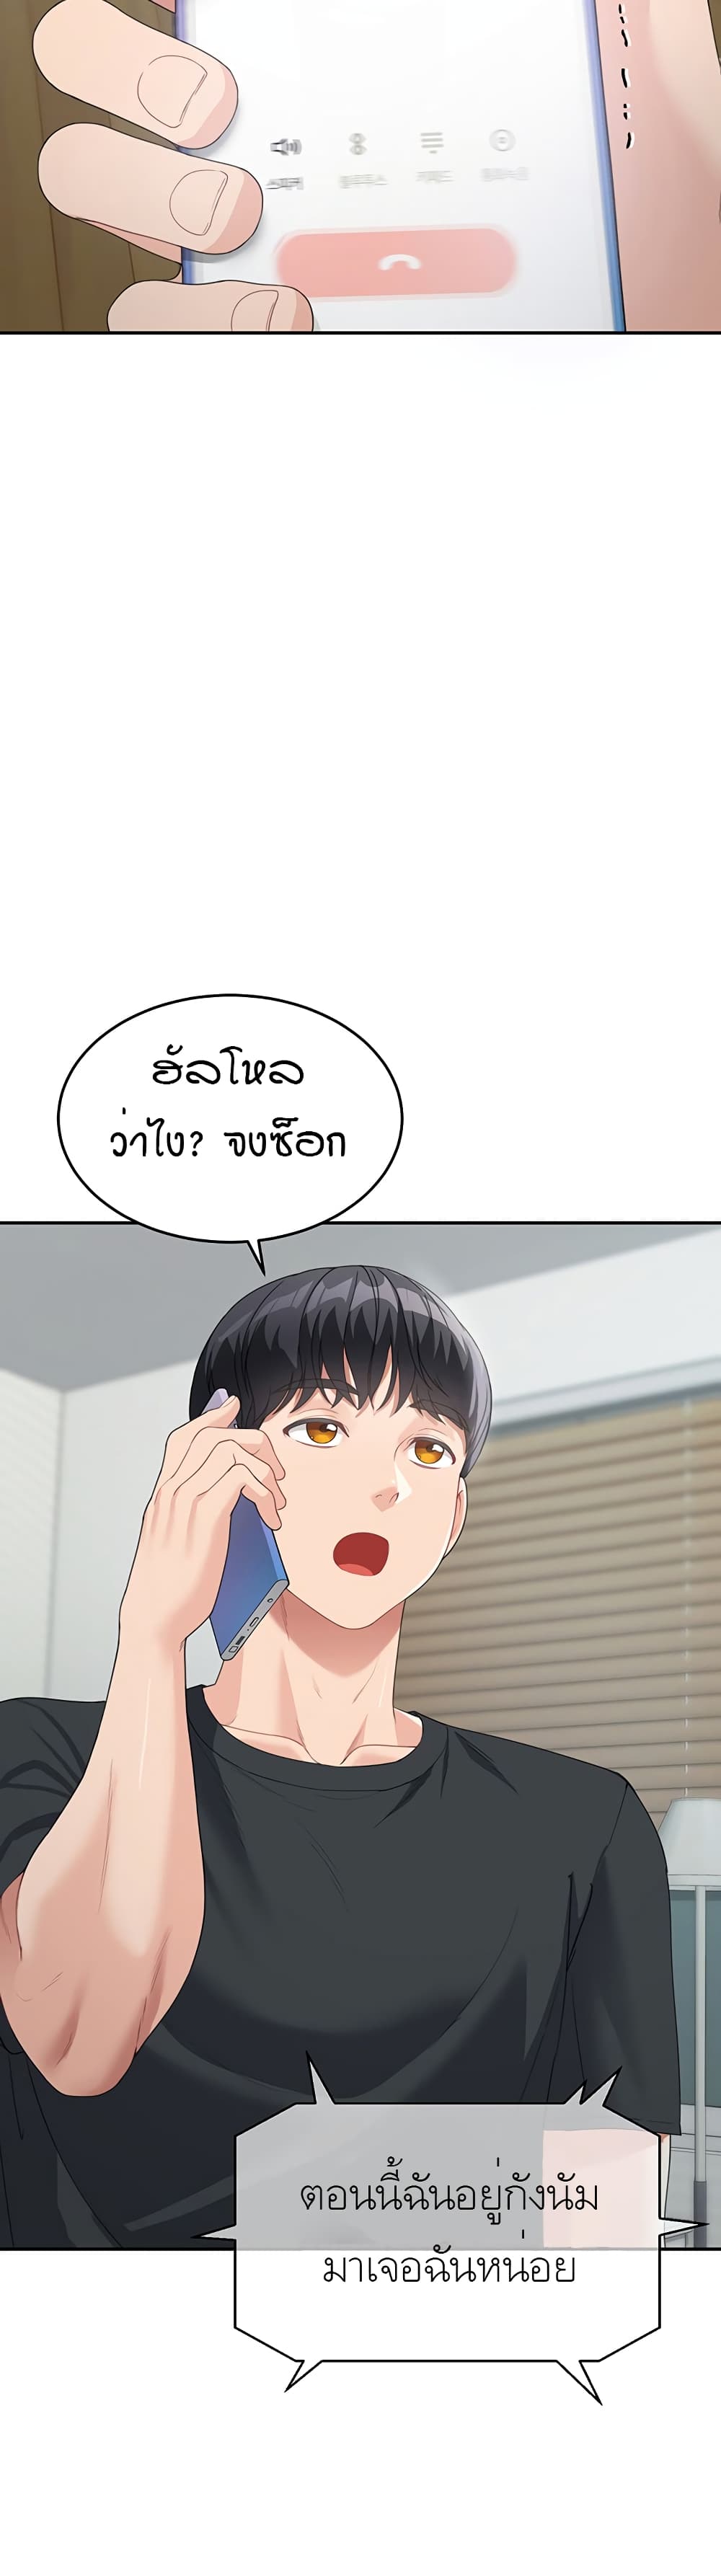 Is It Your Mother or Sister? ตอนที่ 6 ภาพ 46